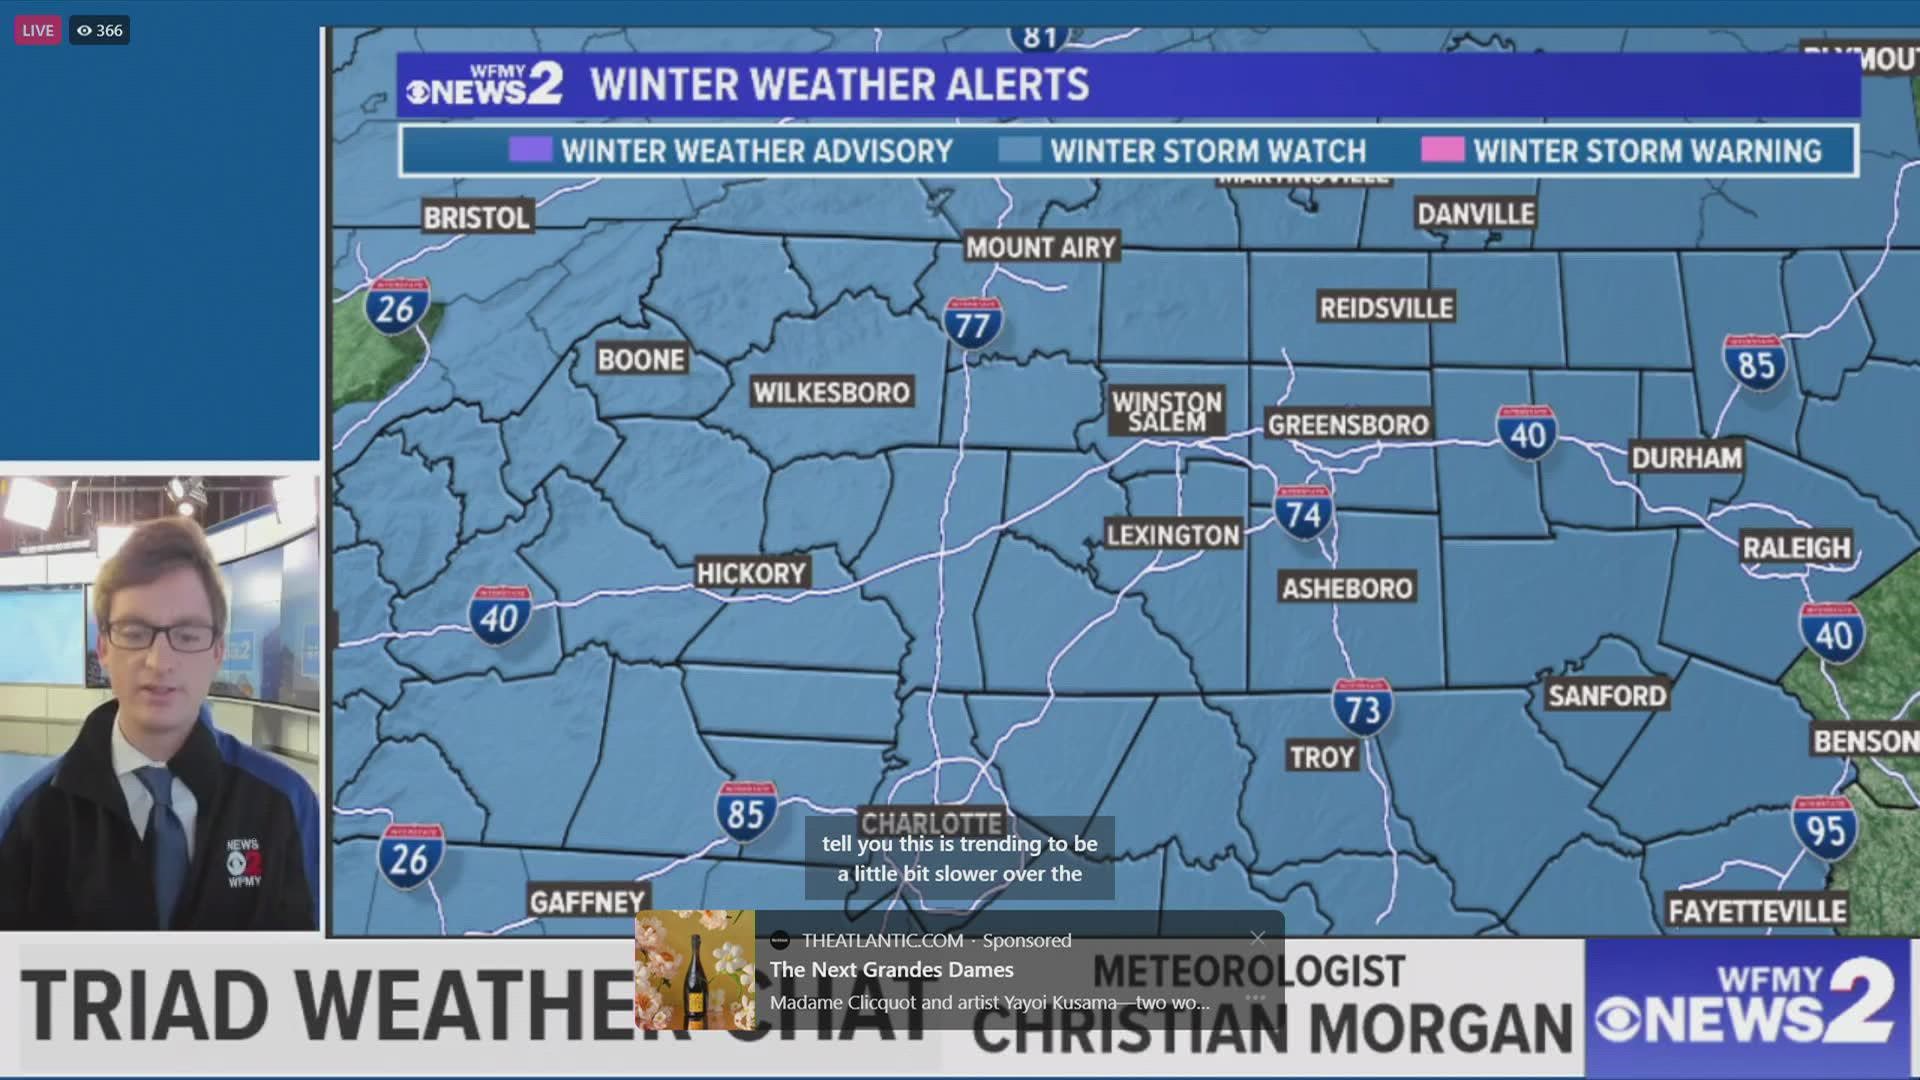 When will the Triad see snow, sleet, and freezing rain this weekend? Christian Morgan breaks down the timeline.